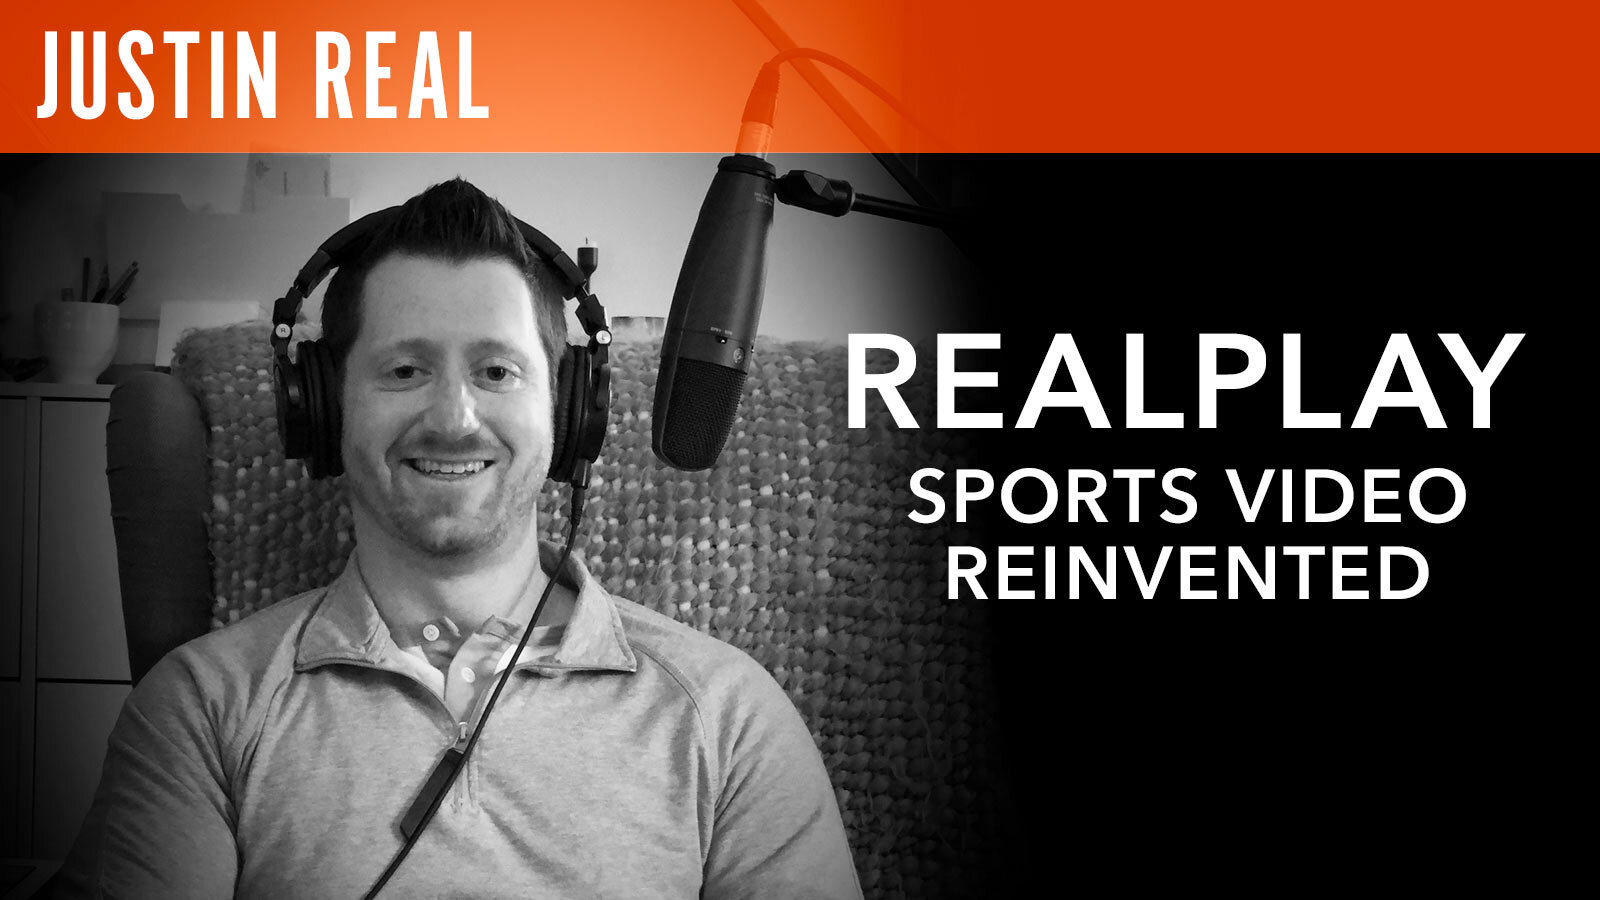 Justin Real, "Realplay: Sports Video Reinvented"